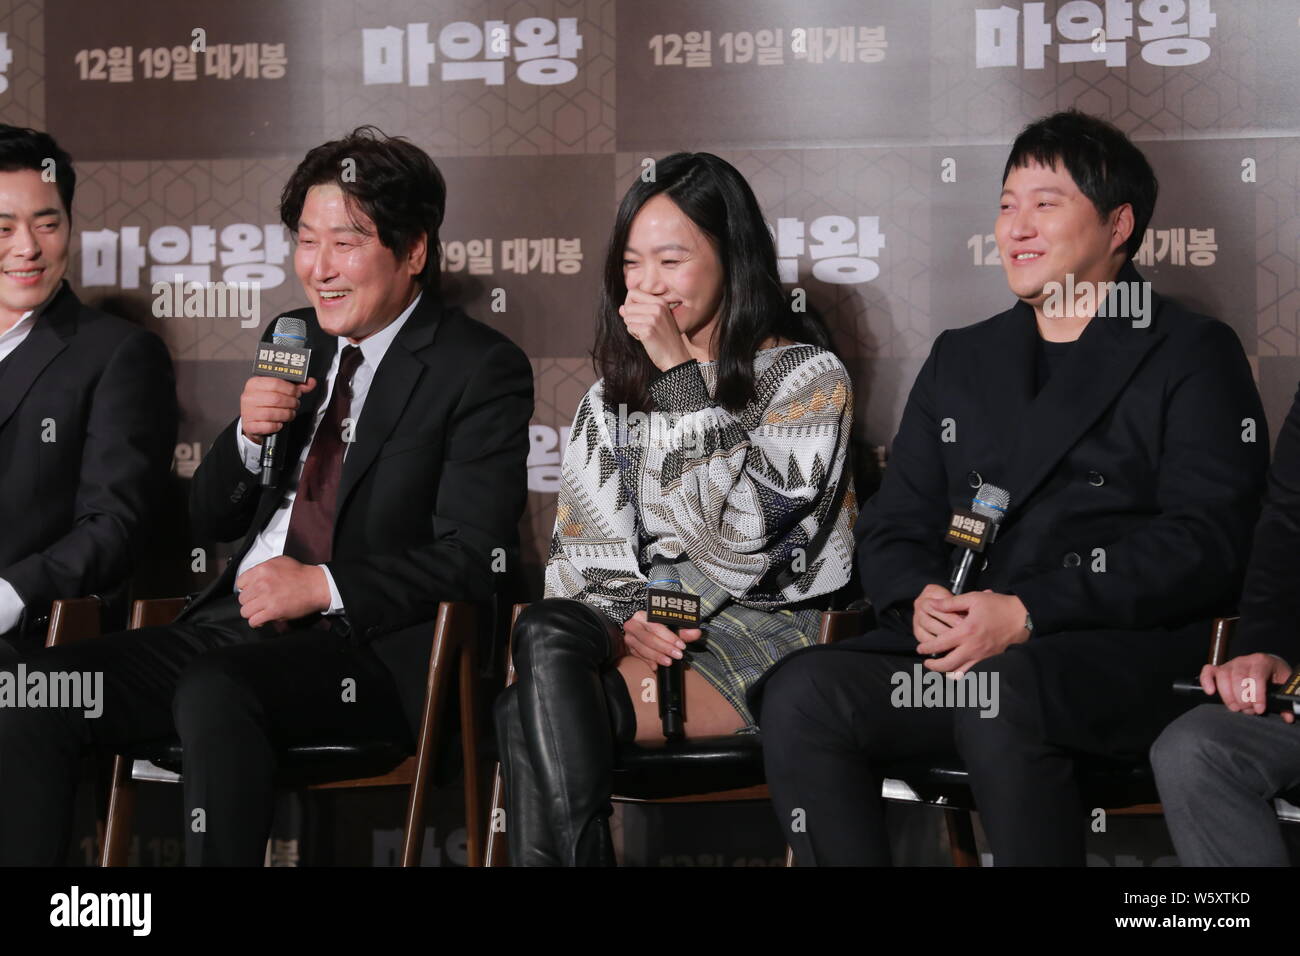 (From left) South Korean actors Jo Jung-suk, Song Kang-ho, actress Bae Doona, and actor Kim Dae-myung attend a press conference for new movie 'Drug Ki Stock Photo